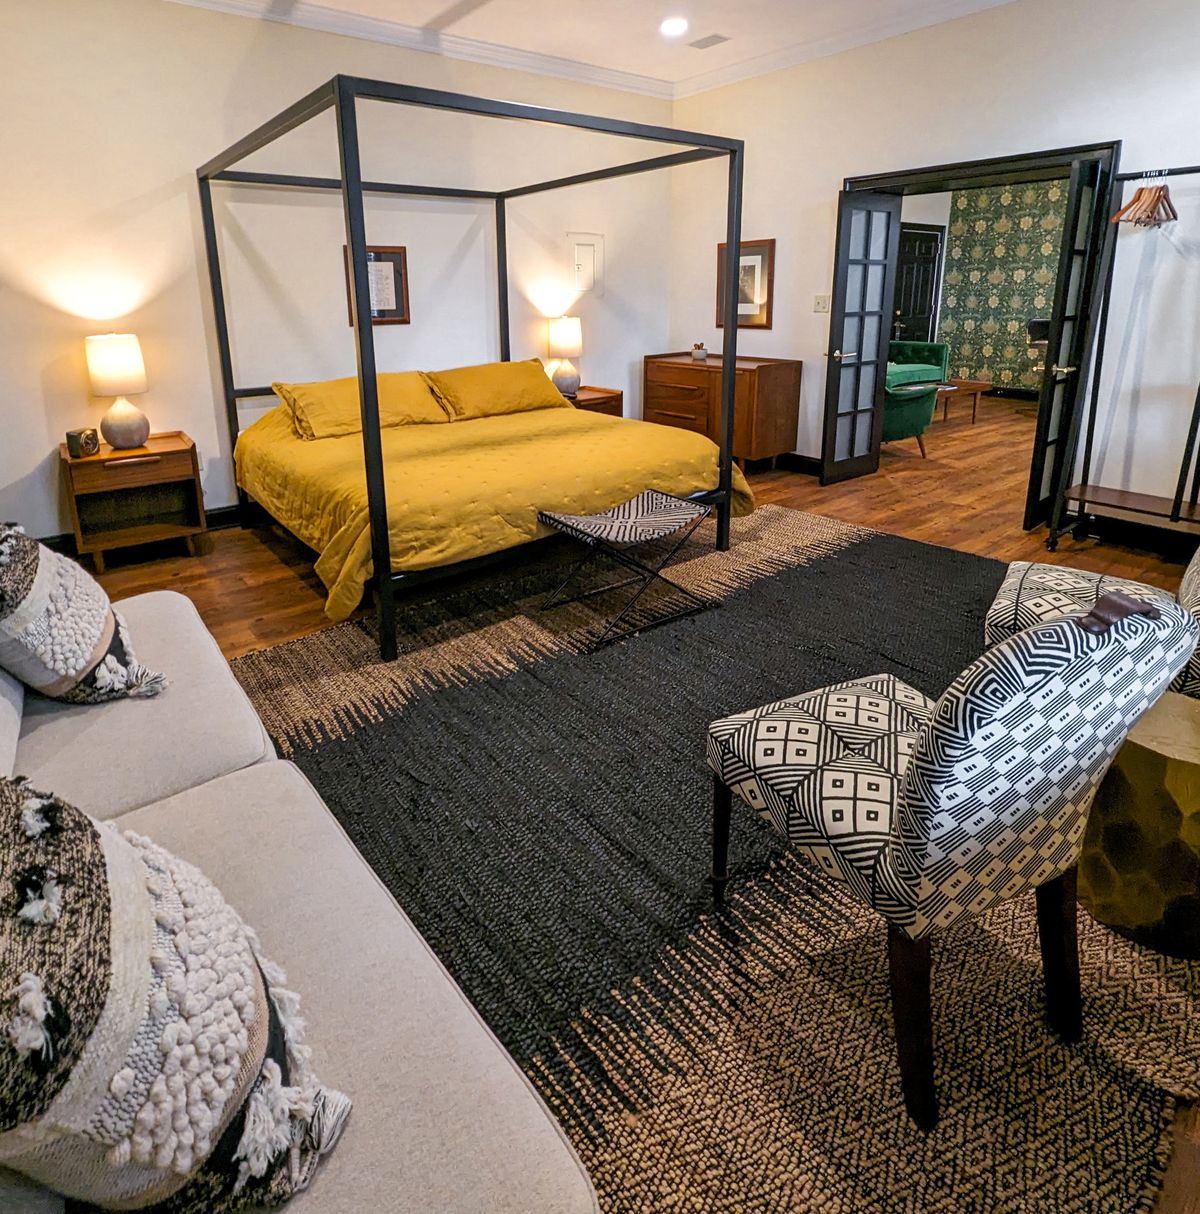 The king bedroom area in the Lincoln suite at the Union Hotel. The room has hardwood floors, a canopy bed with yellow and black patterned bedding, colorful throw pillows, and a seating area with armchairs and ottomans in various prints. French doors lead to an adjoining room.